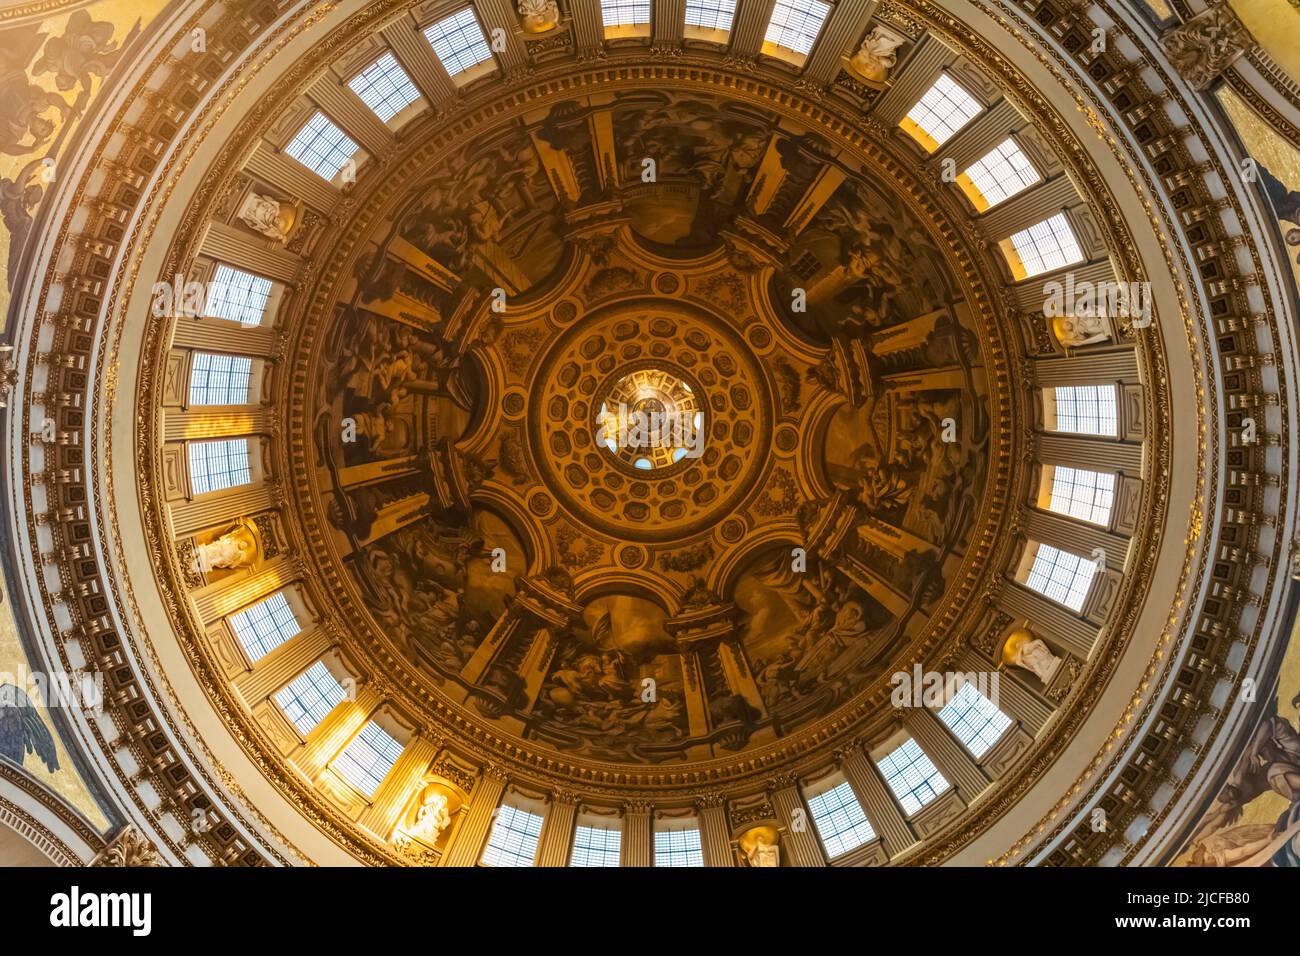 England, London, St. Paul's Cathedral, The Dome designed by Sir Christopher Wren and Painted by Sir James Thornhill Stock Photo